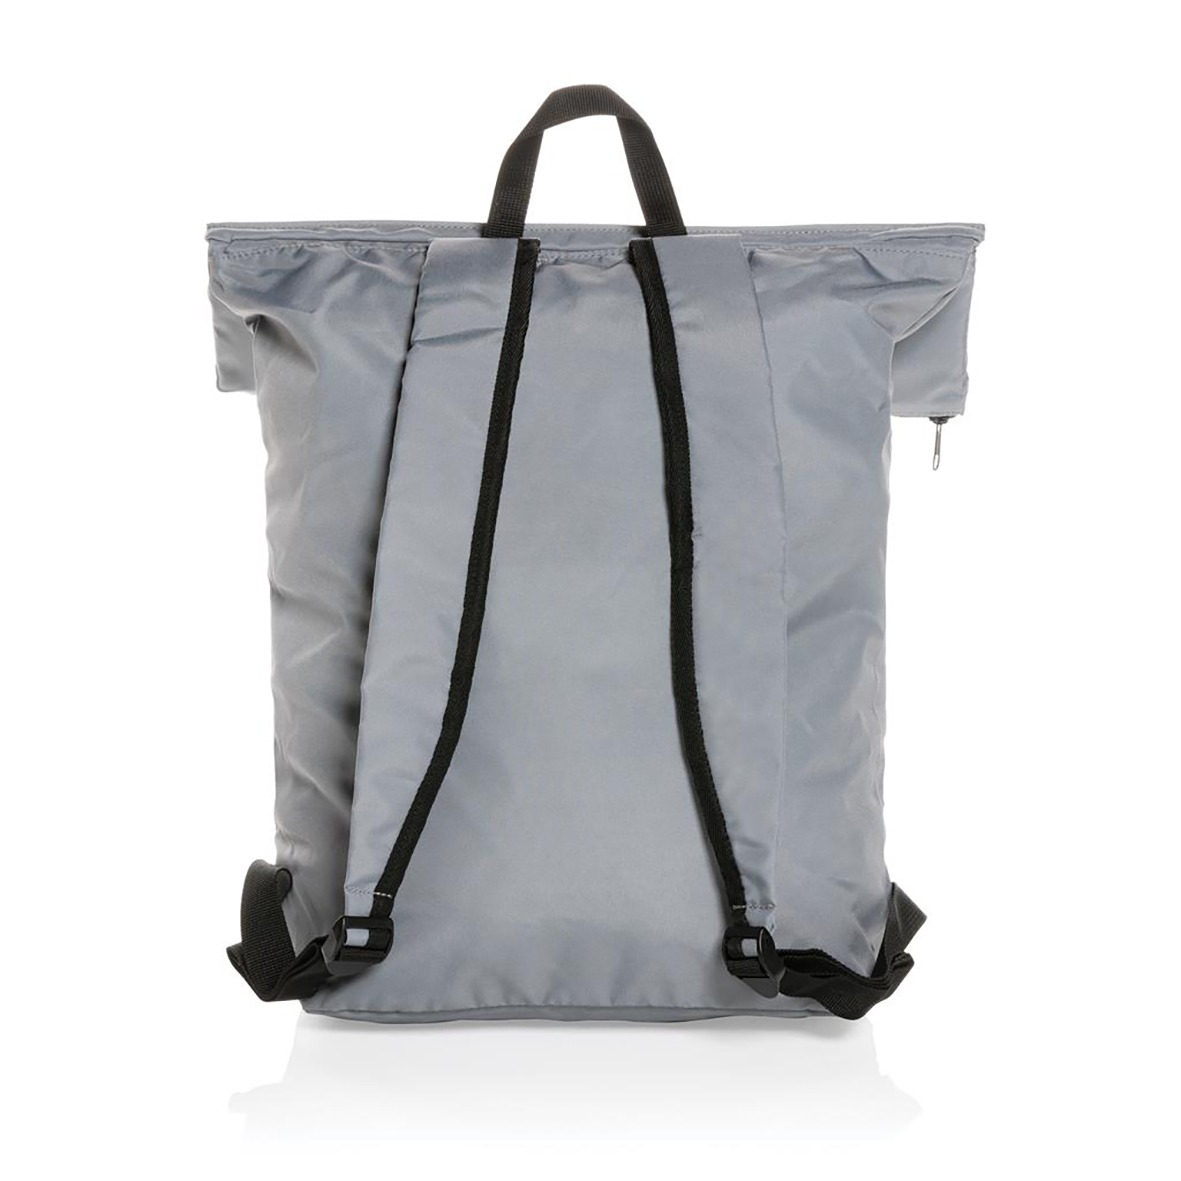 Sac a dos pliable, recycle, personnalise-5